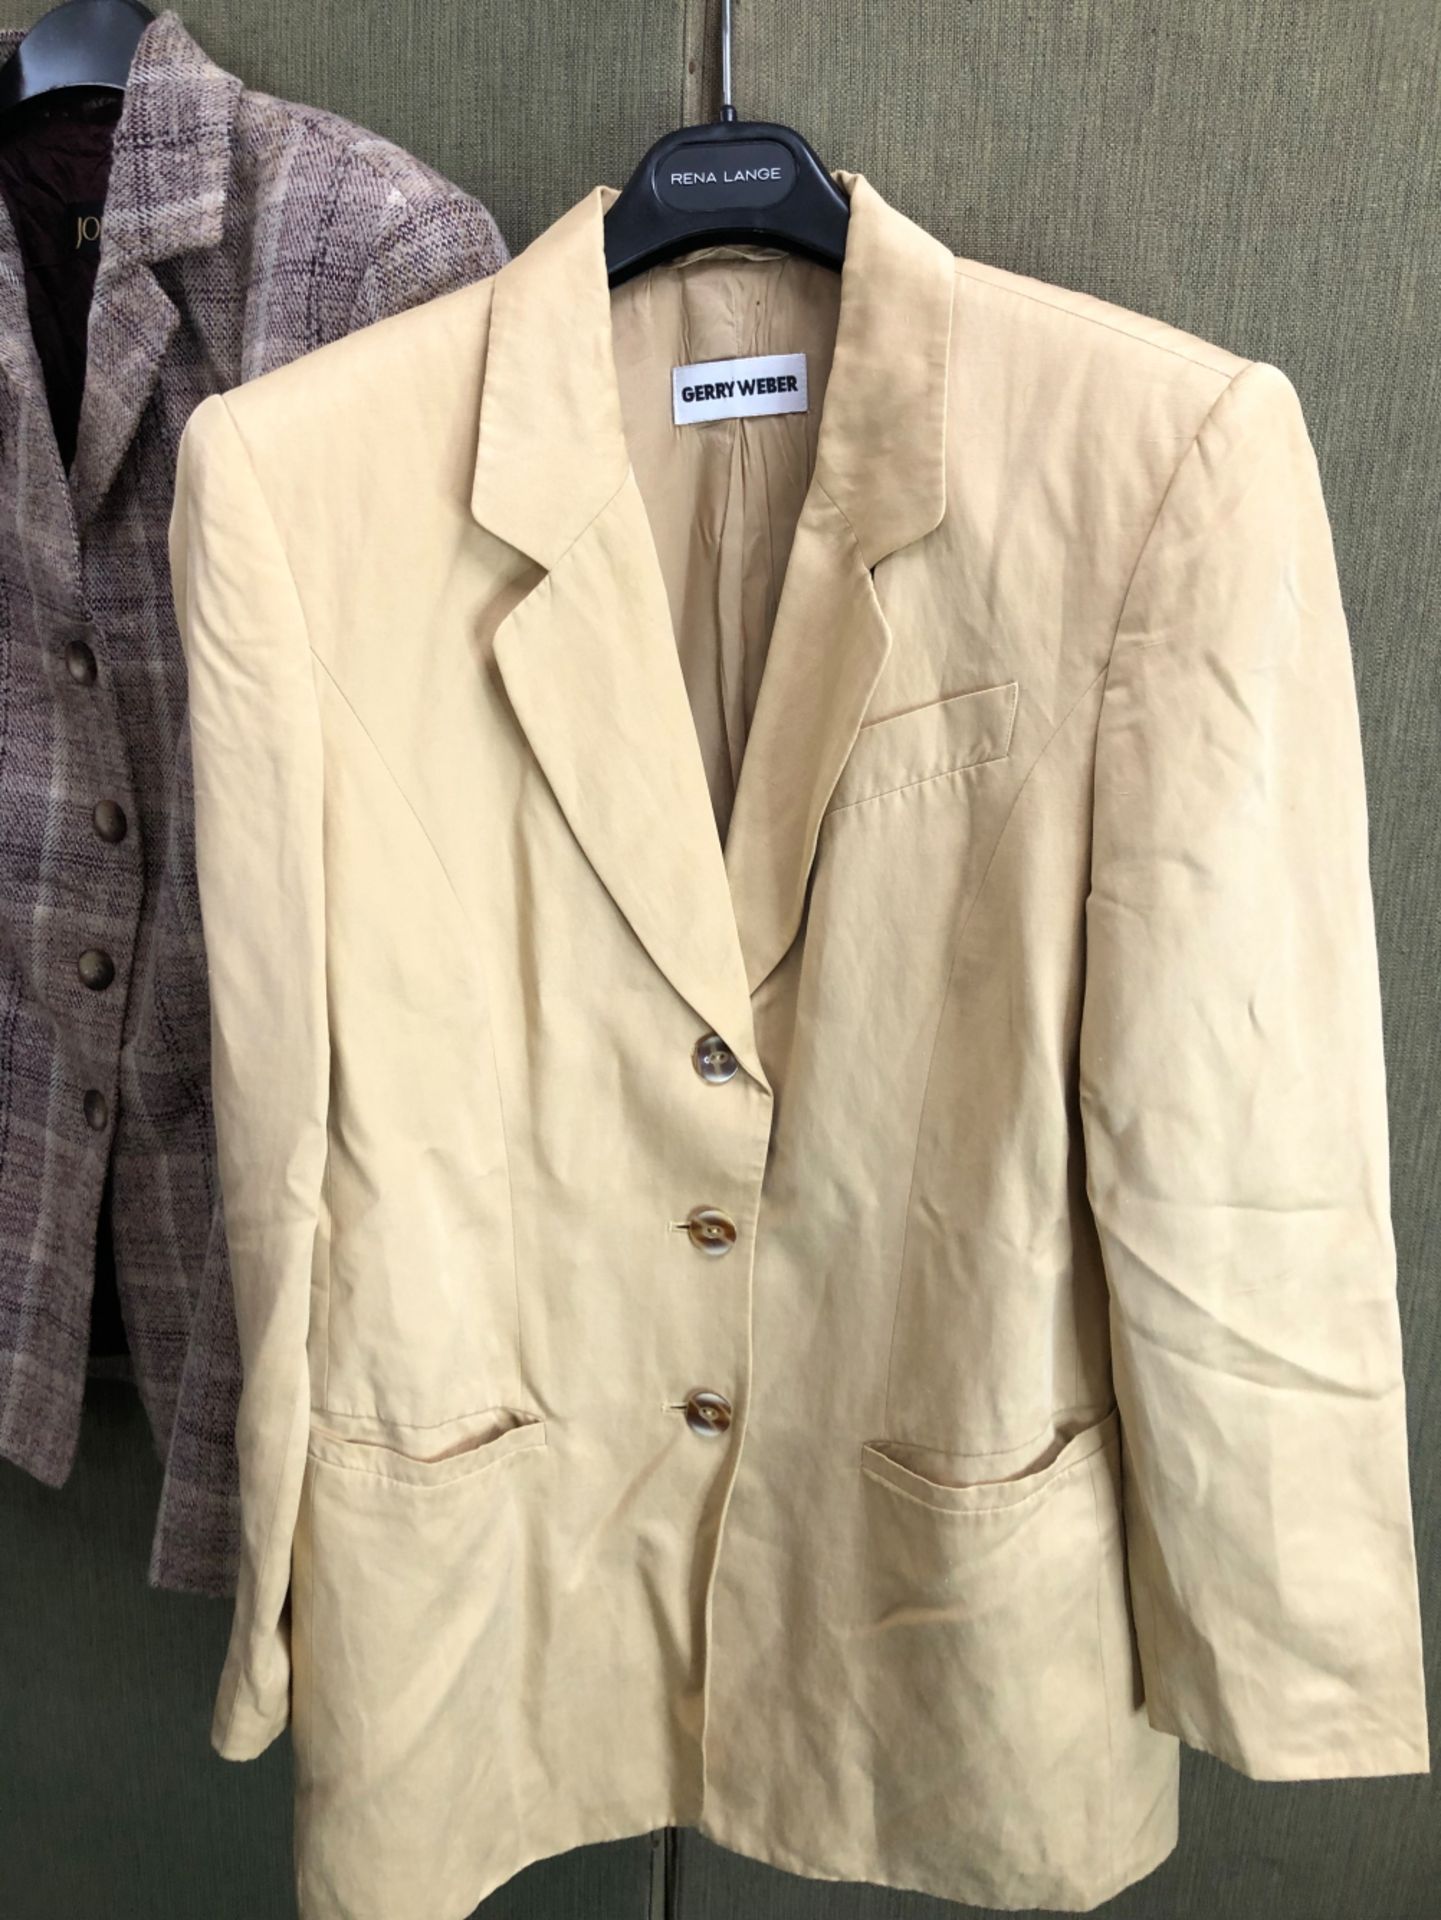 A GERRY WEBER PALE YELLOW SILK AND LINEN BLEND JACKET, SIZE ON TAG 36, TWO JOBIS CHECK PATTERN - Image 2 of 11